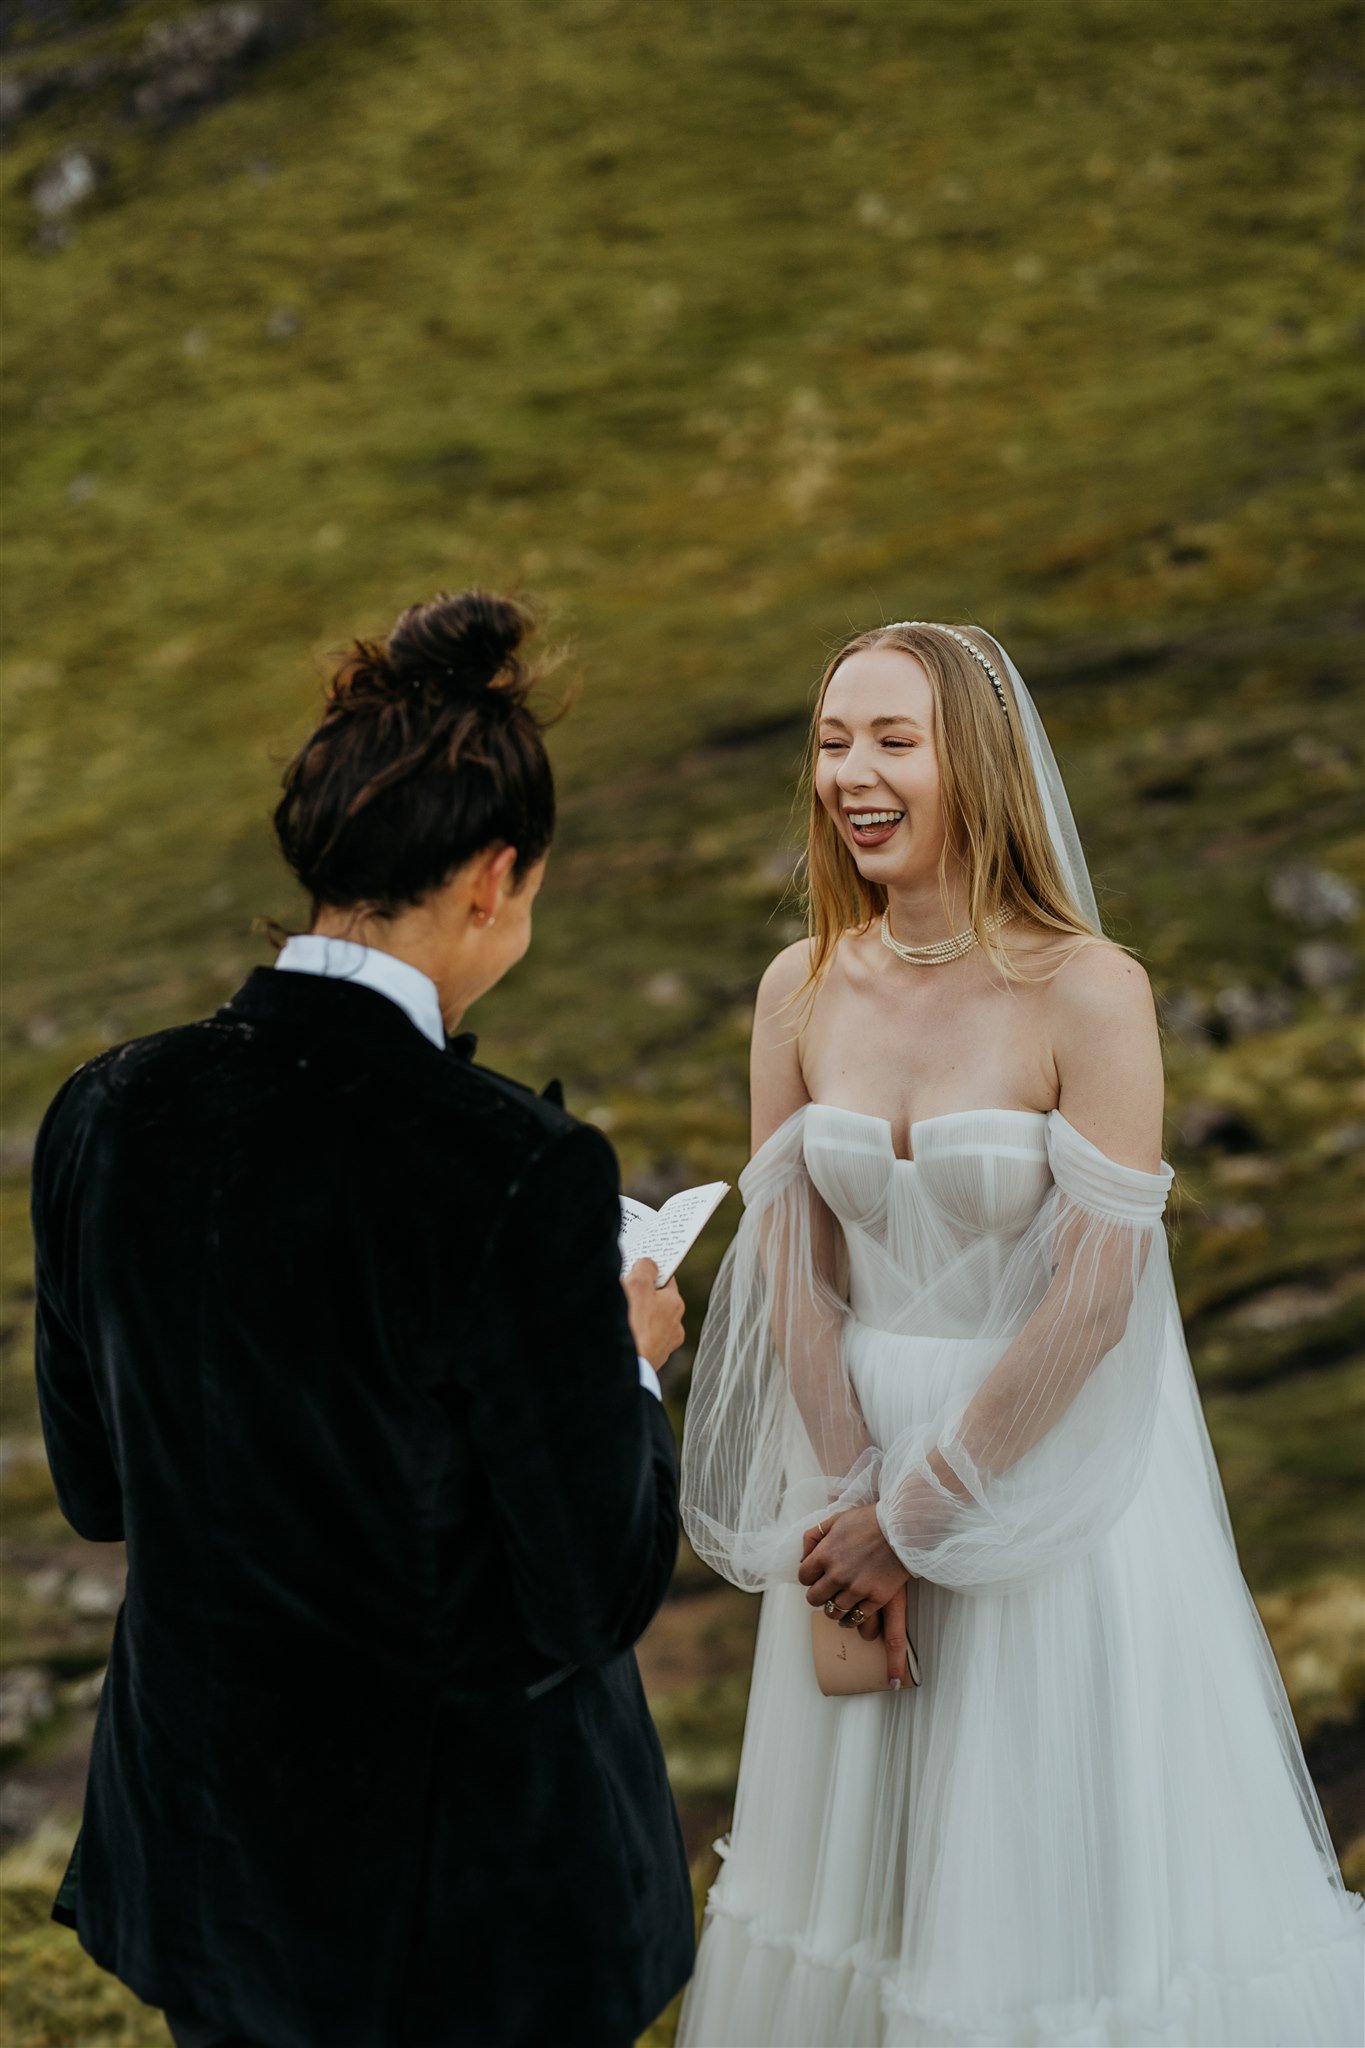 Brides laugh while exchanging vows at their Isle of Skye elopement